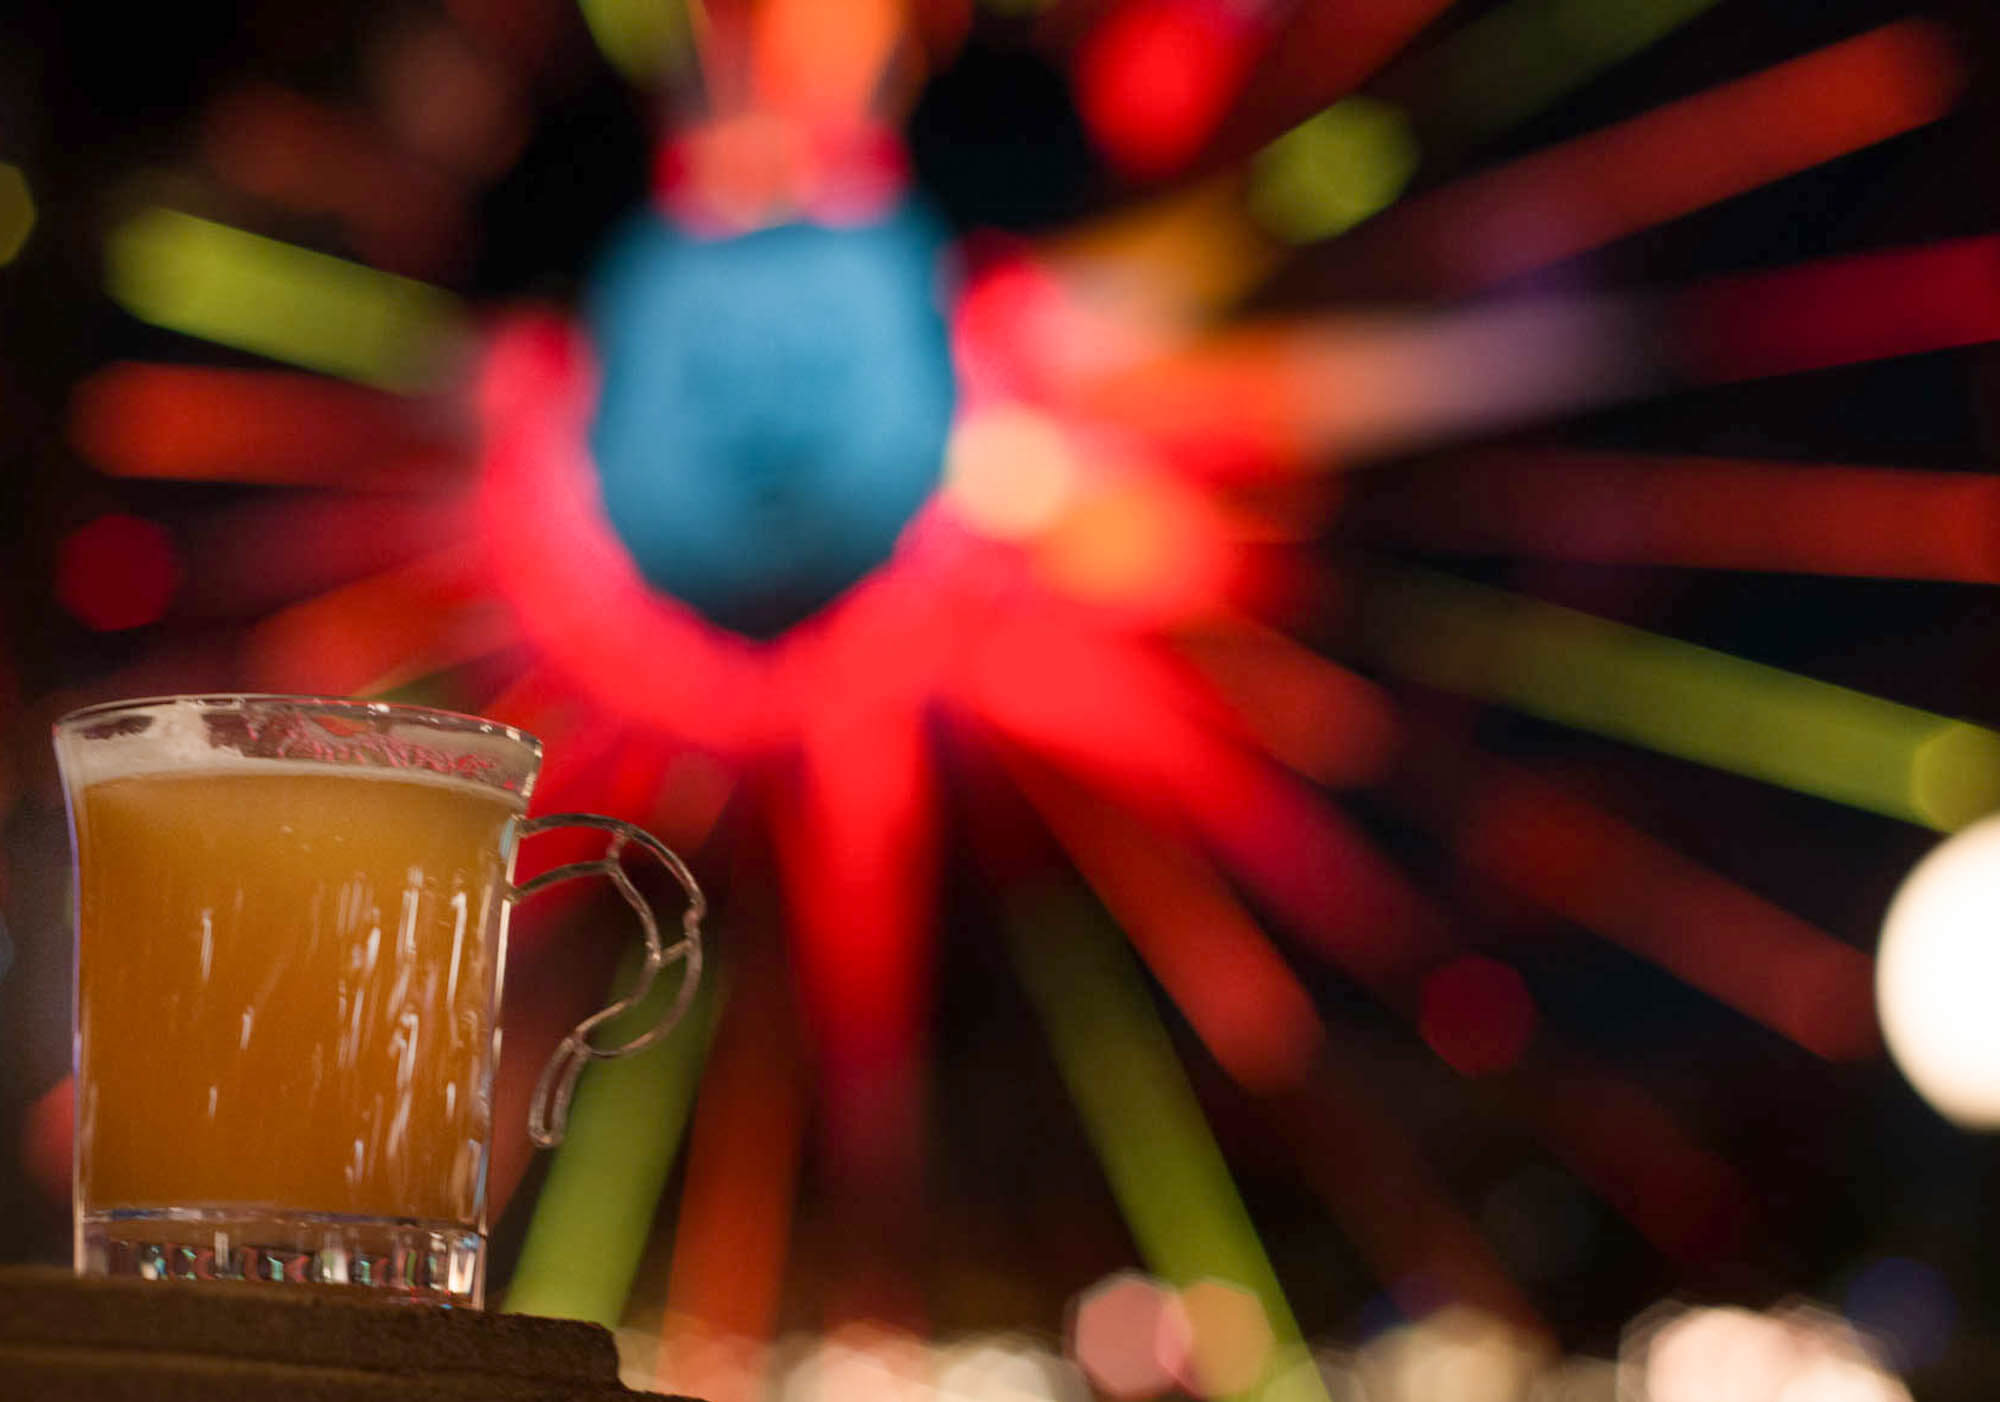 Warm Bourbon Cider with House-made Bourbon-infused Marshmallow at Disneyland Festival of Holidays